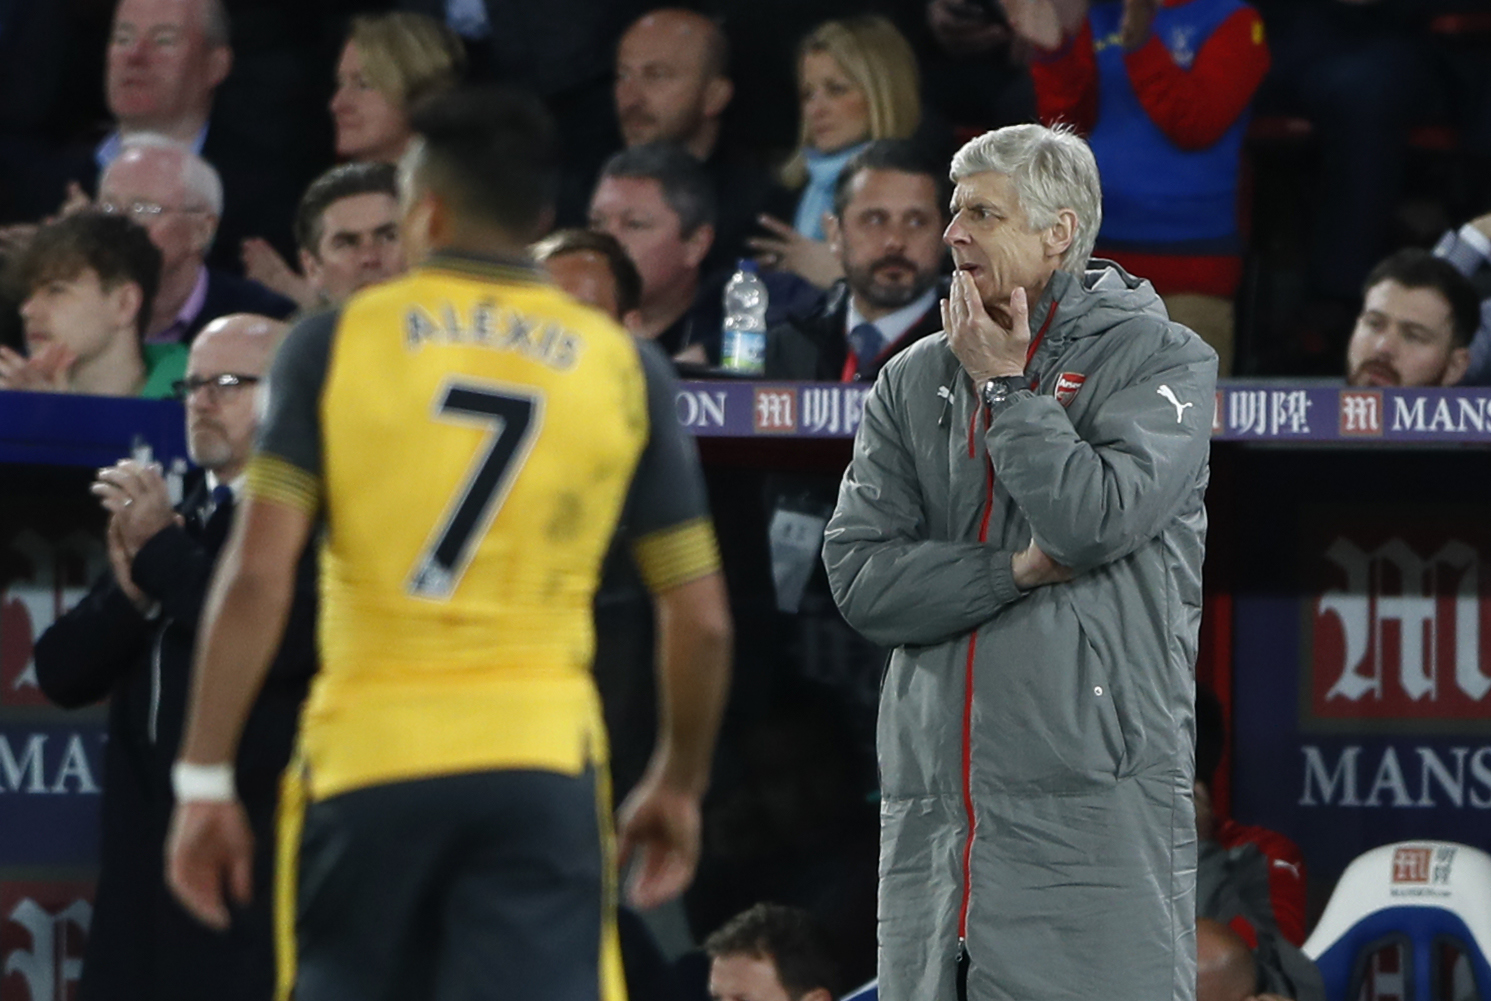 arsenal manager arsene wenger looks dejected during match against crystal palace on april 10 2017 photo reuters